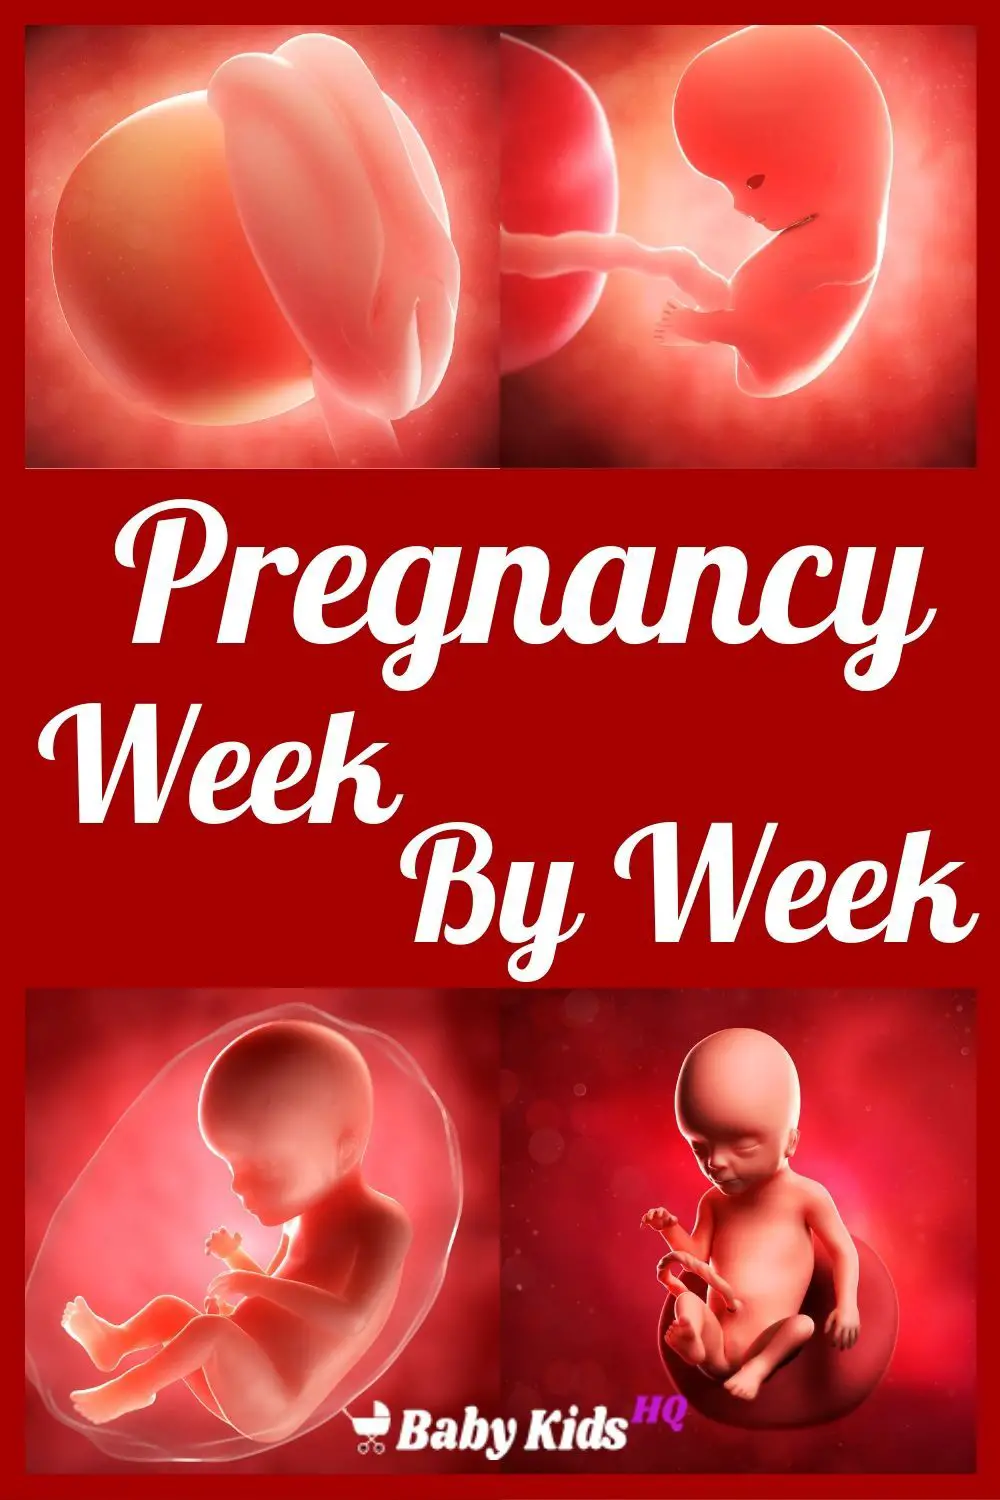 How Can I Determine How Many Weeks Pregnant I Am